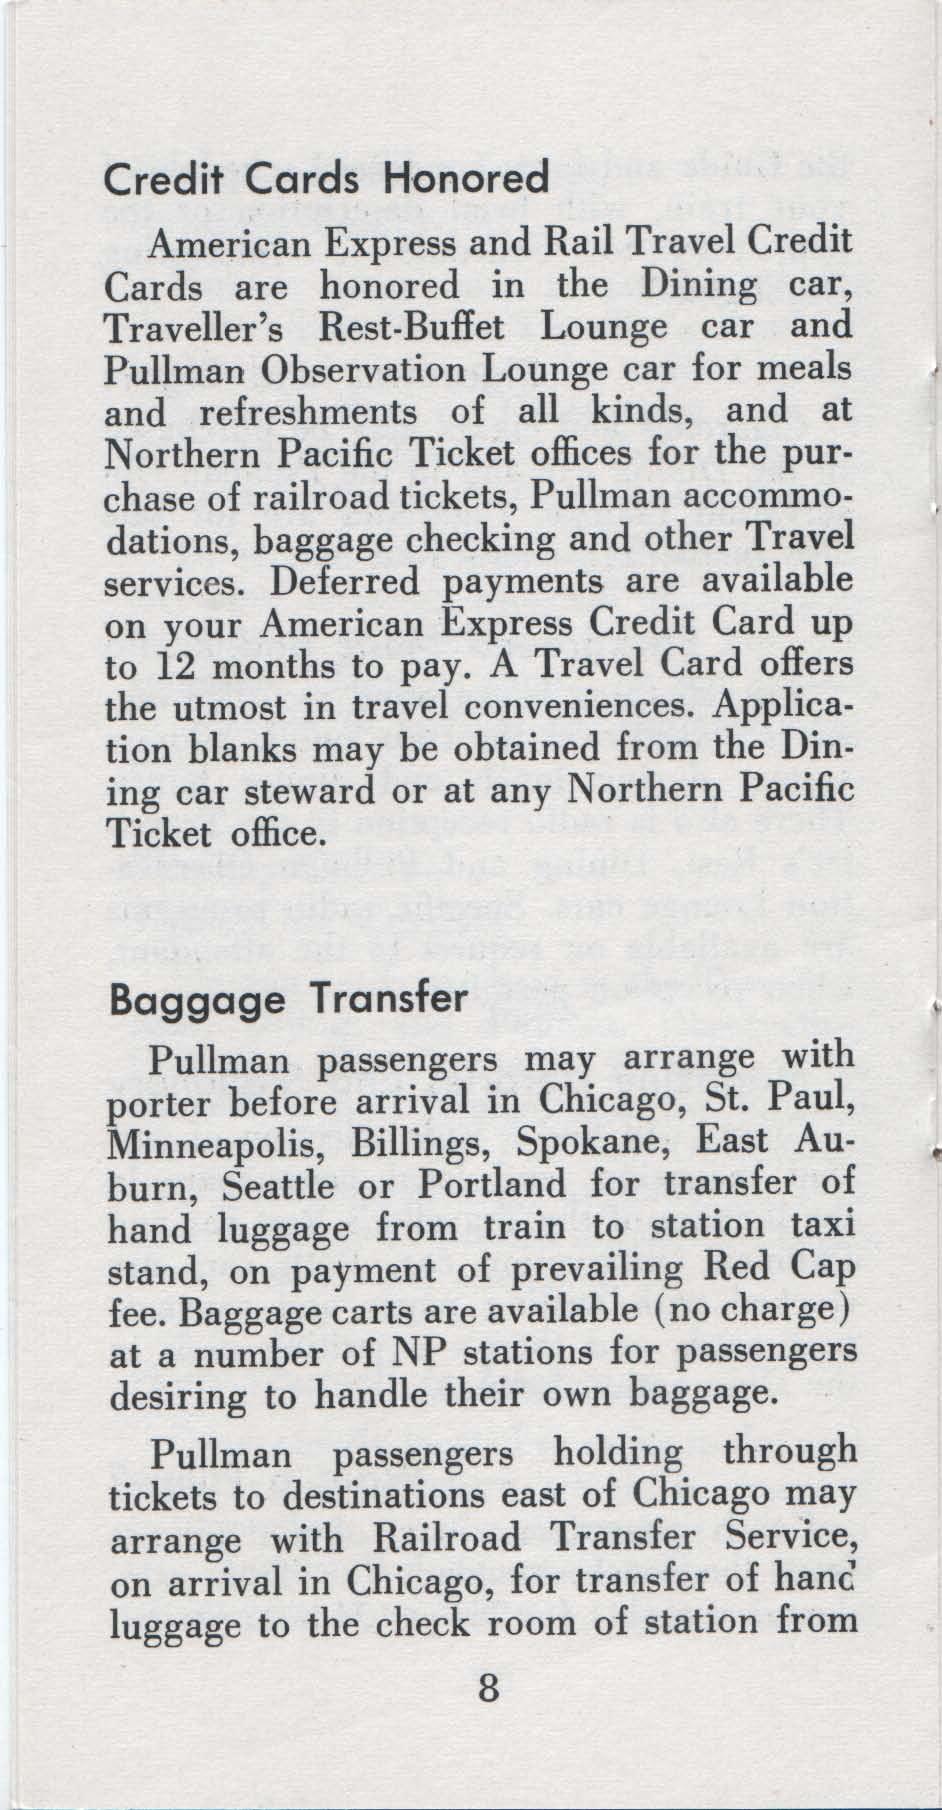 Credit Cards Honored American Express and Rail Travel Credit Cards are honored in the Dining car, Traveller's Rest-Buffet Lounge car and Pullman Observation Lounge car for meals and refreshments of